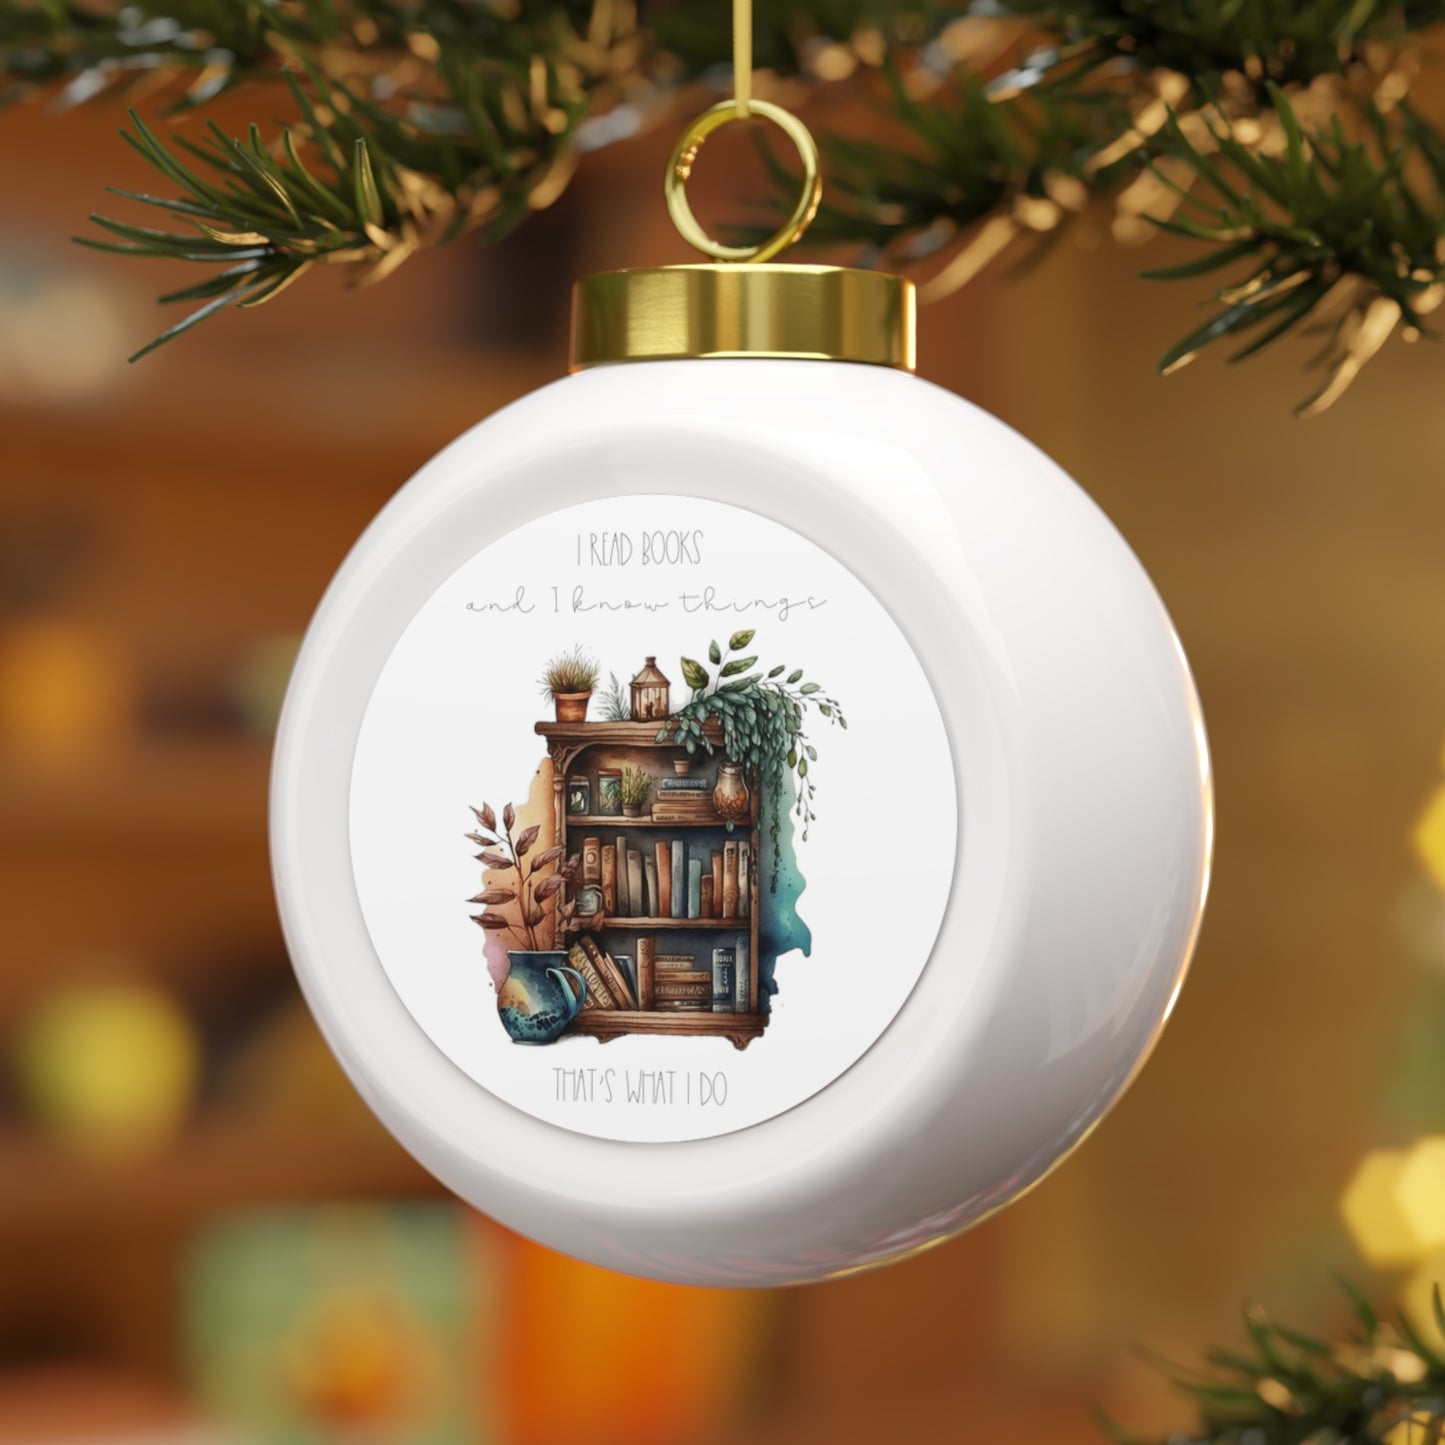 Christmas Ball Ornament “I read books and I know things. That’s what I do.”